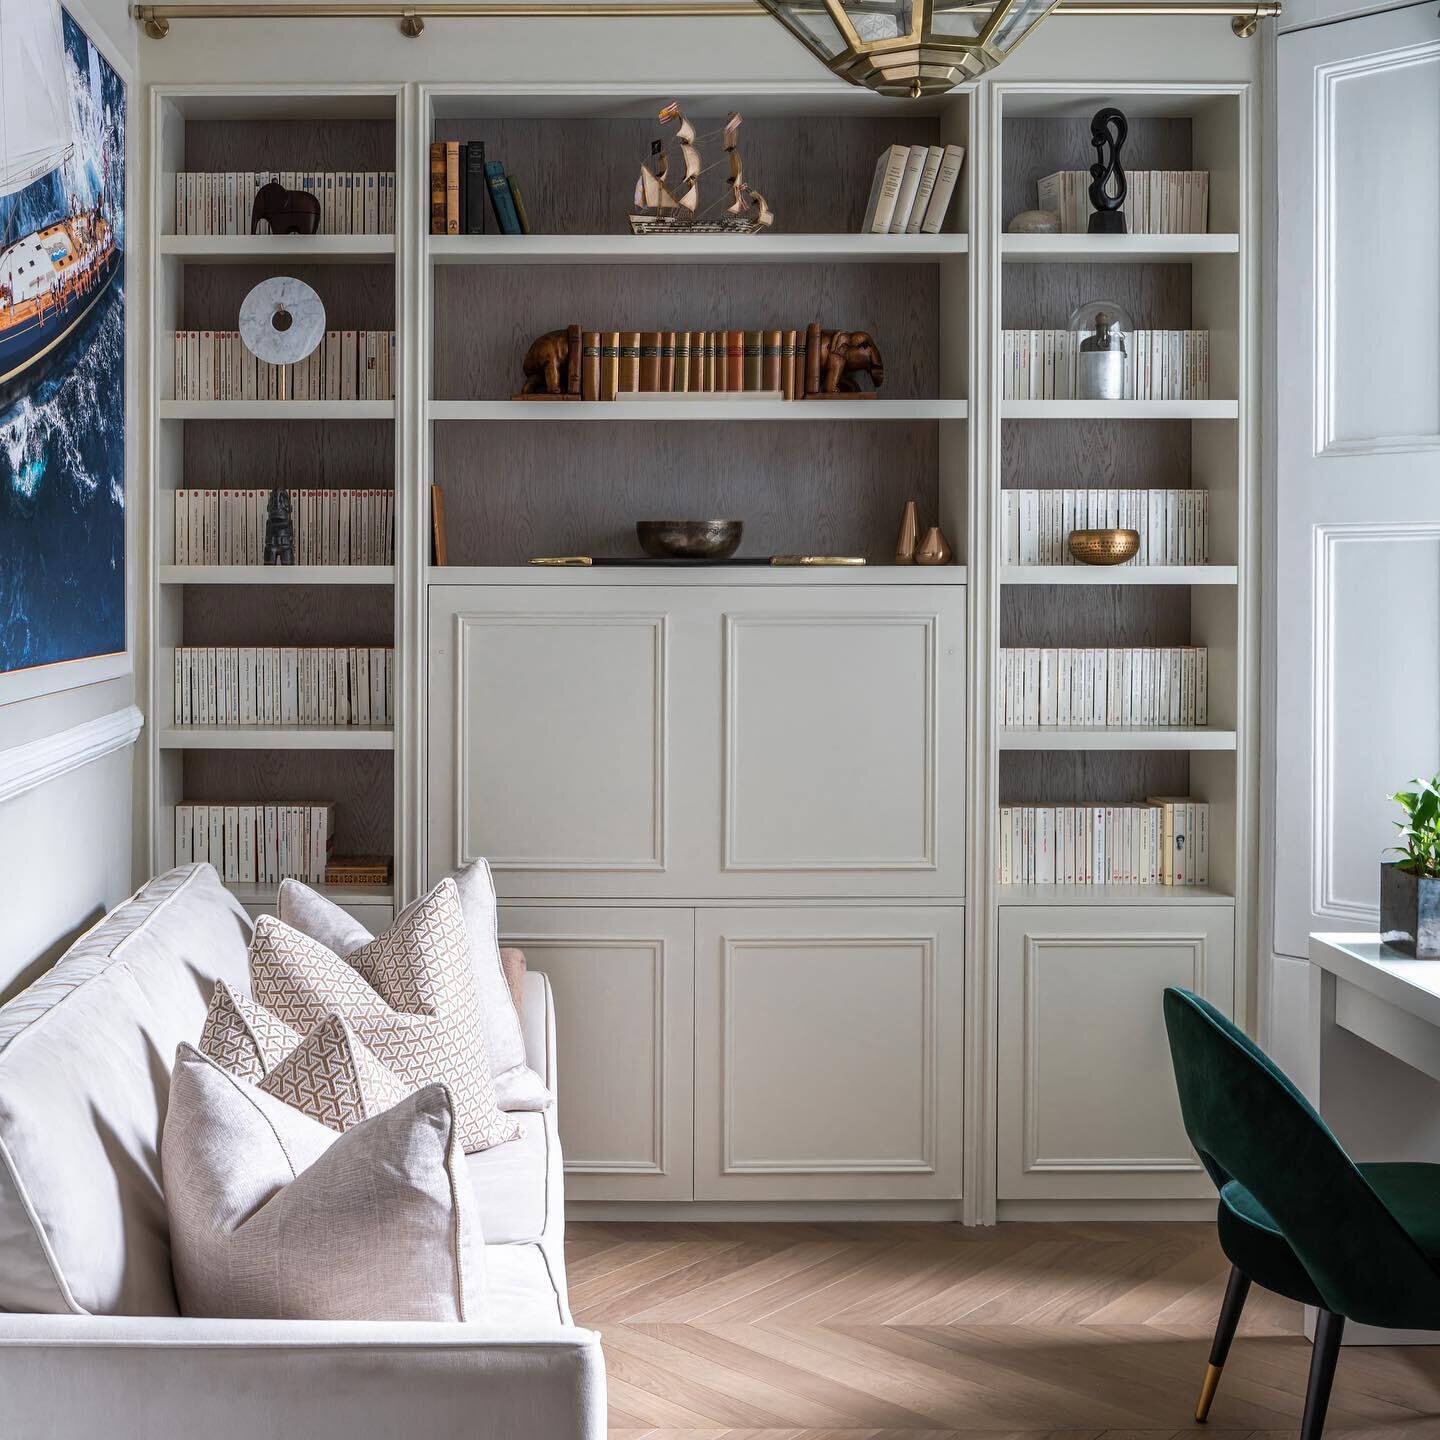 With this weather, we might as well start reading some books inside 😀🤩 (scroll to see the before!) #bespoke #bookshelf #beforeandafter #interior #design #interiors #instadesign #designinspiration #ourproject #refurbishment #flat #london #instadecor